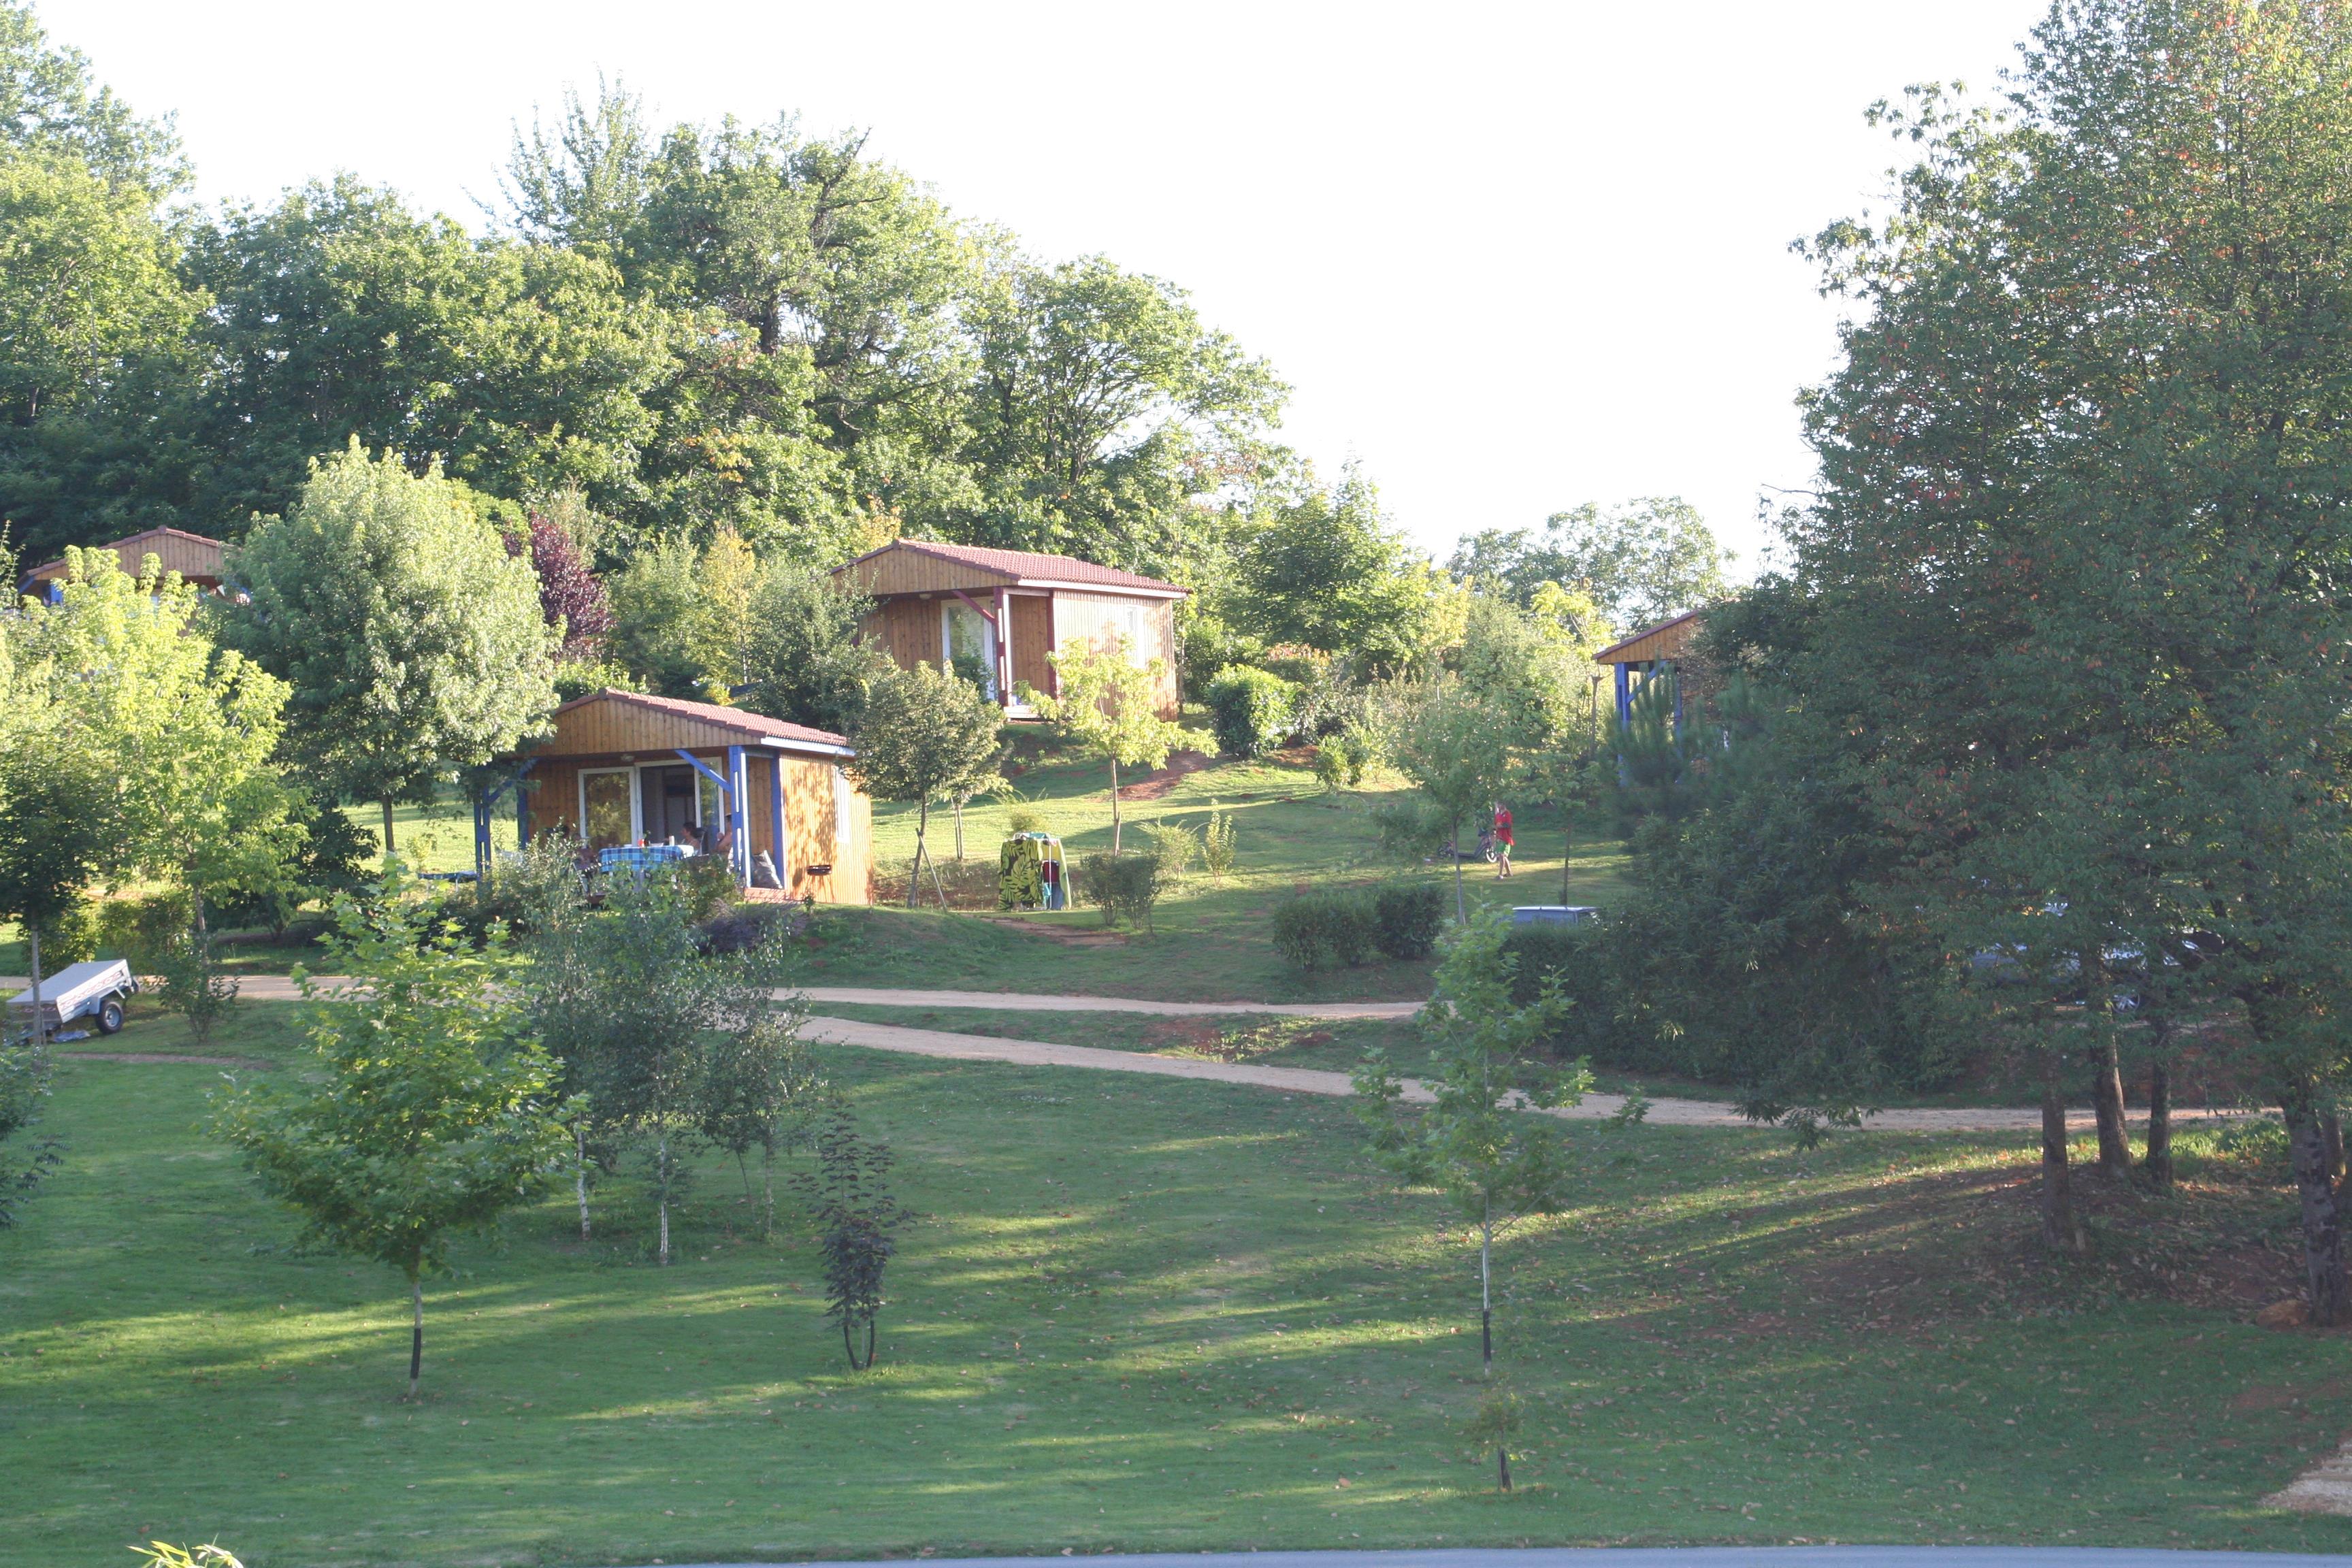 Location - Chalet Farniente 20M² / 2 Chambres - 20M² Terrasse (10M2 Couverte) - Camping Les Valades